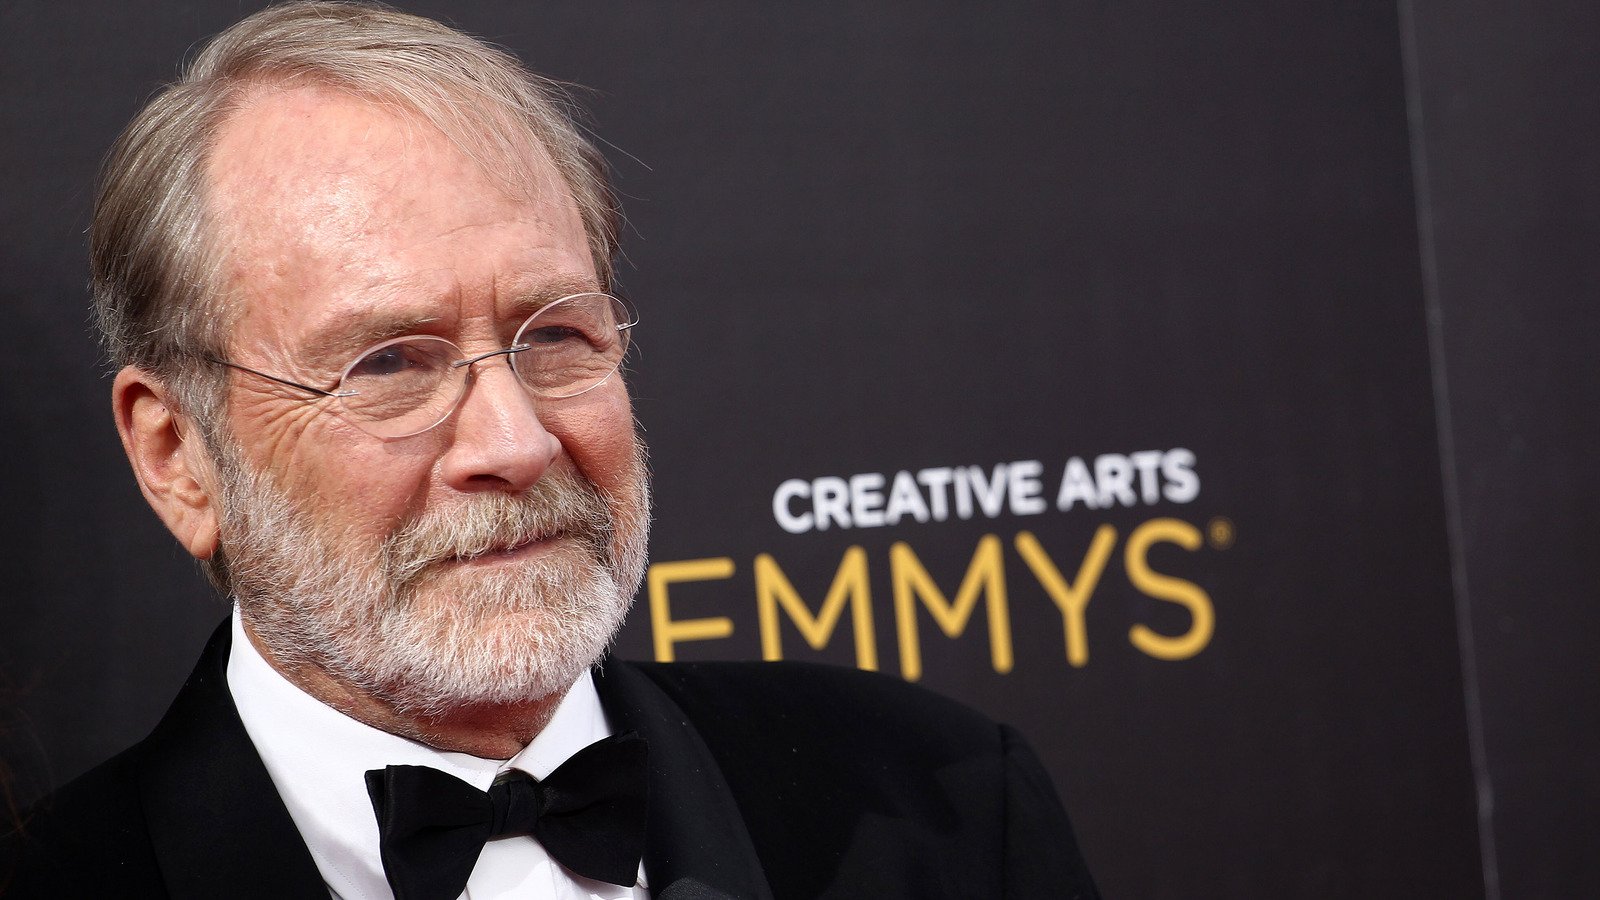 Martin Mull, Clue And Arrested Development Actor, Has Died At 80